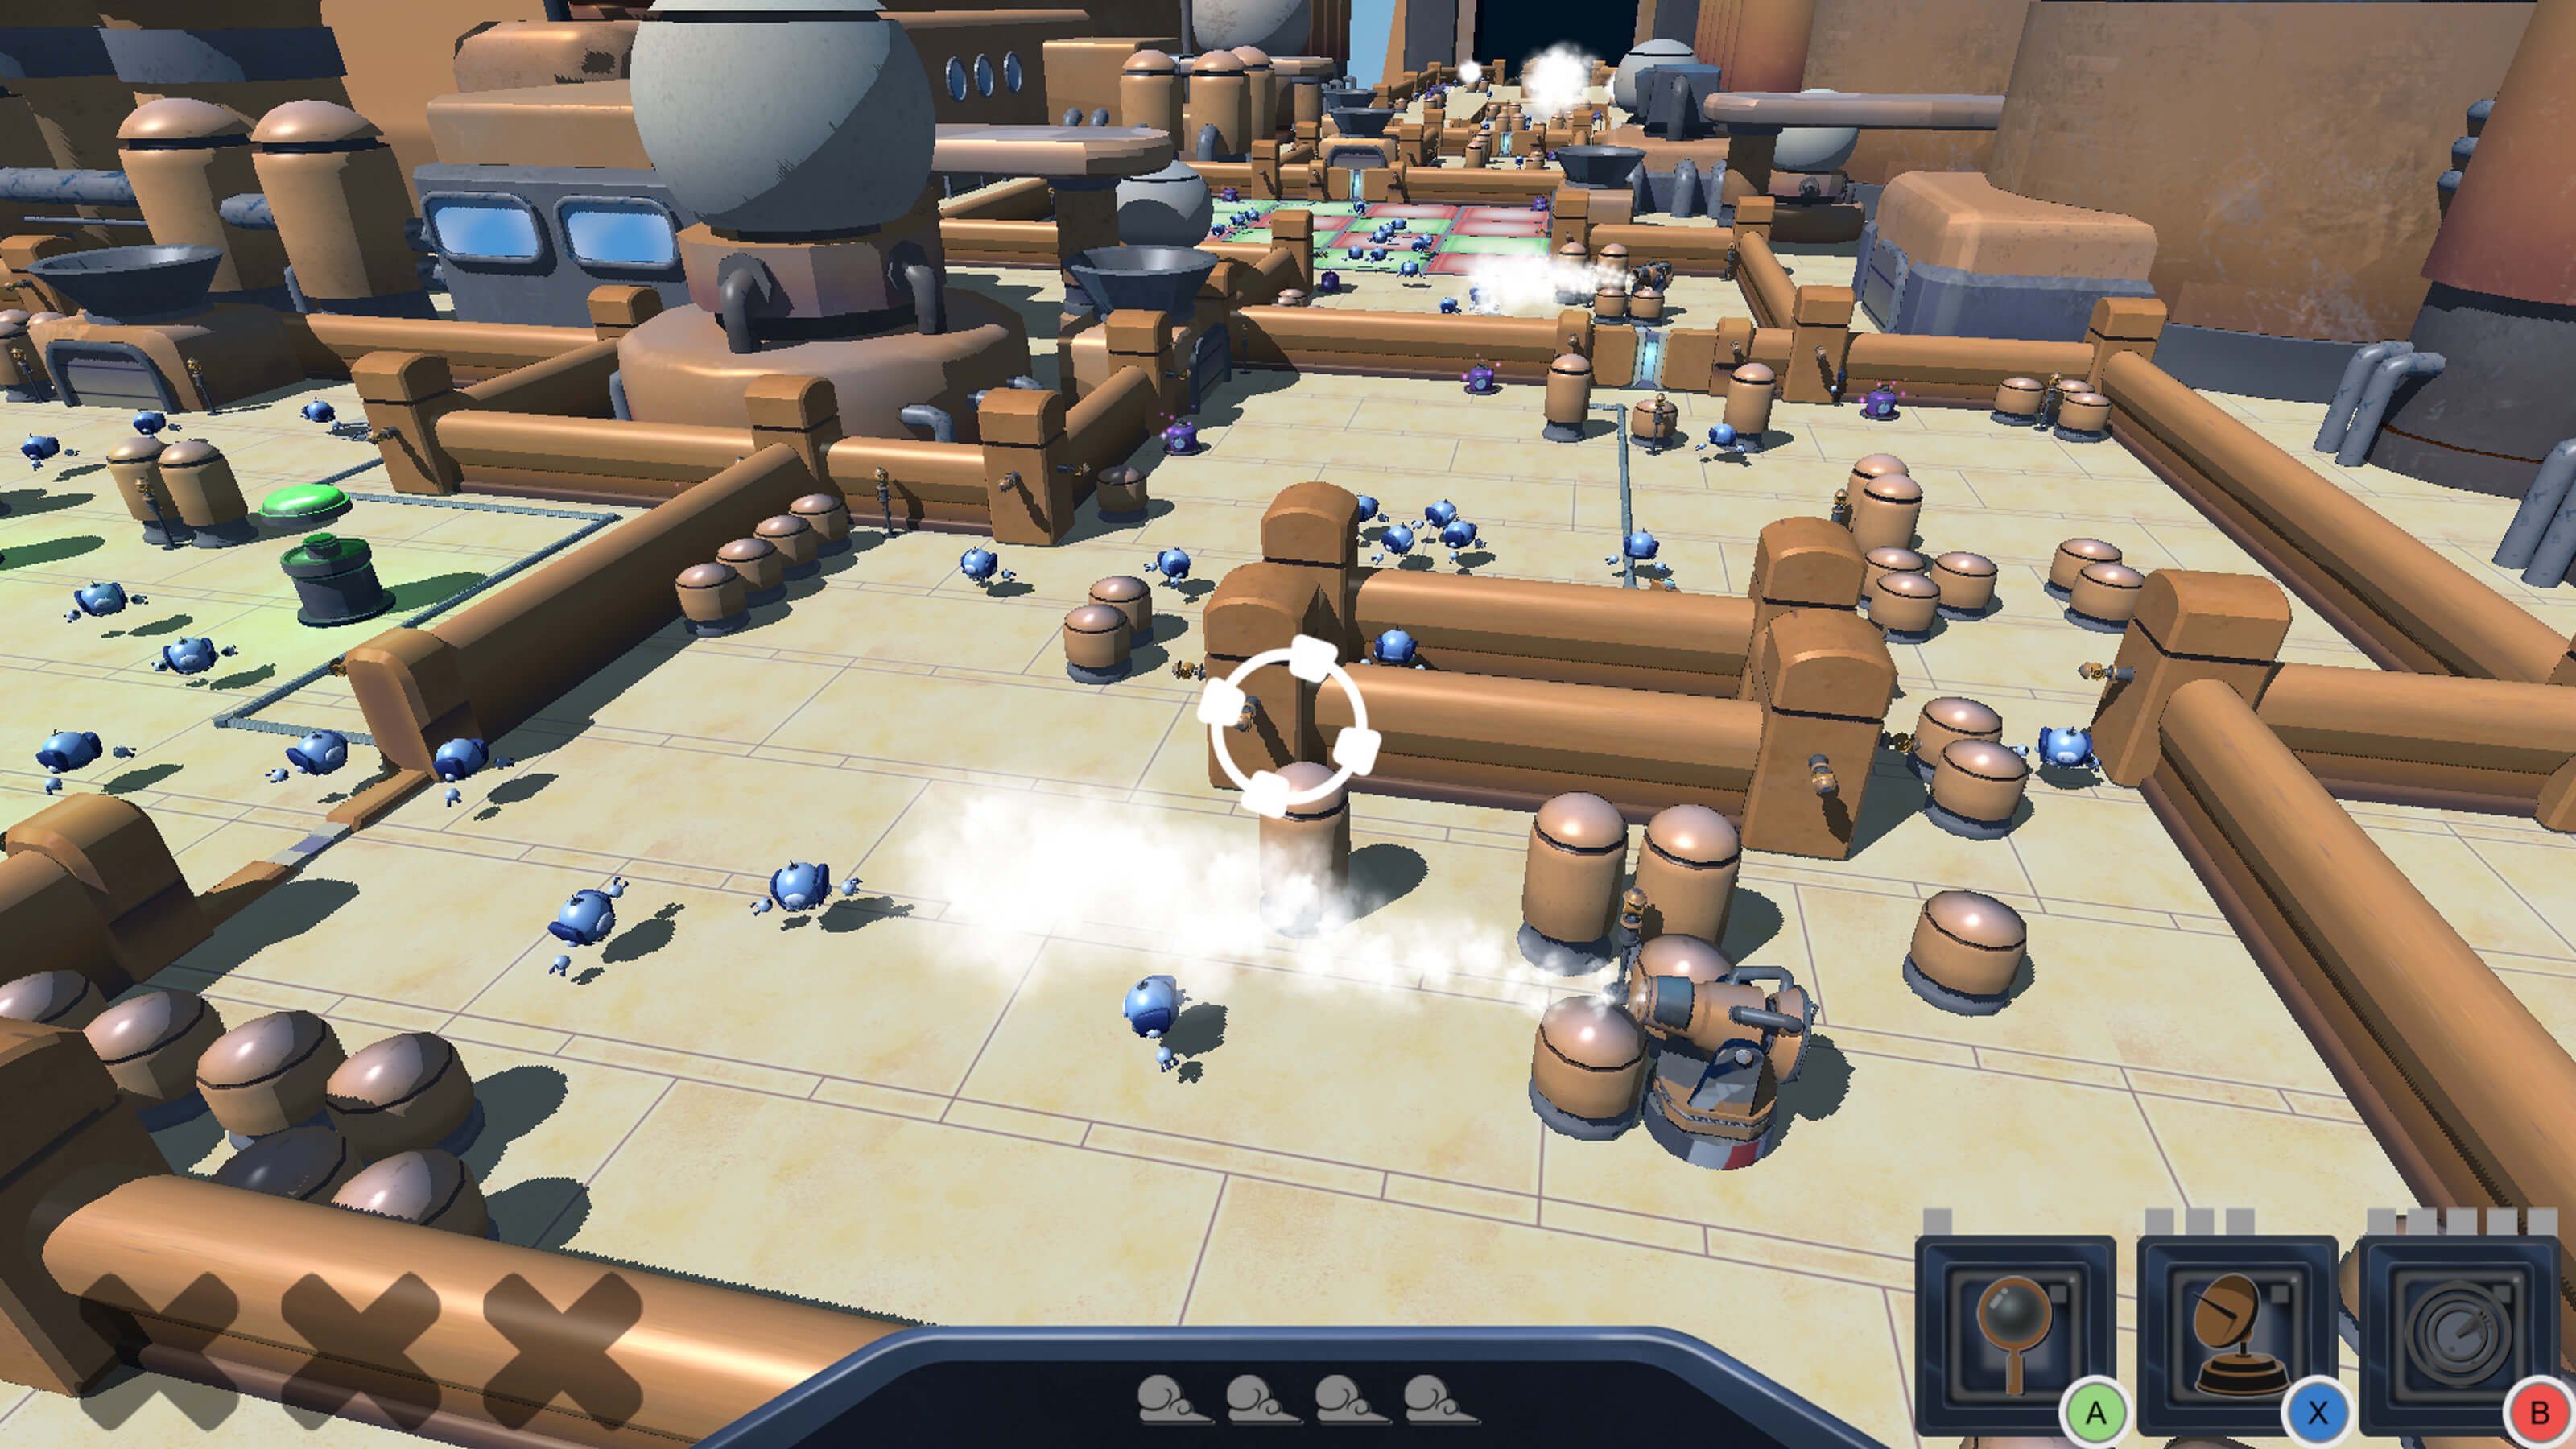 The airship floor covered in floating blue robot workers. 